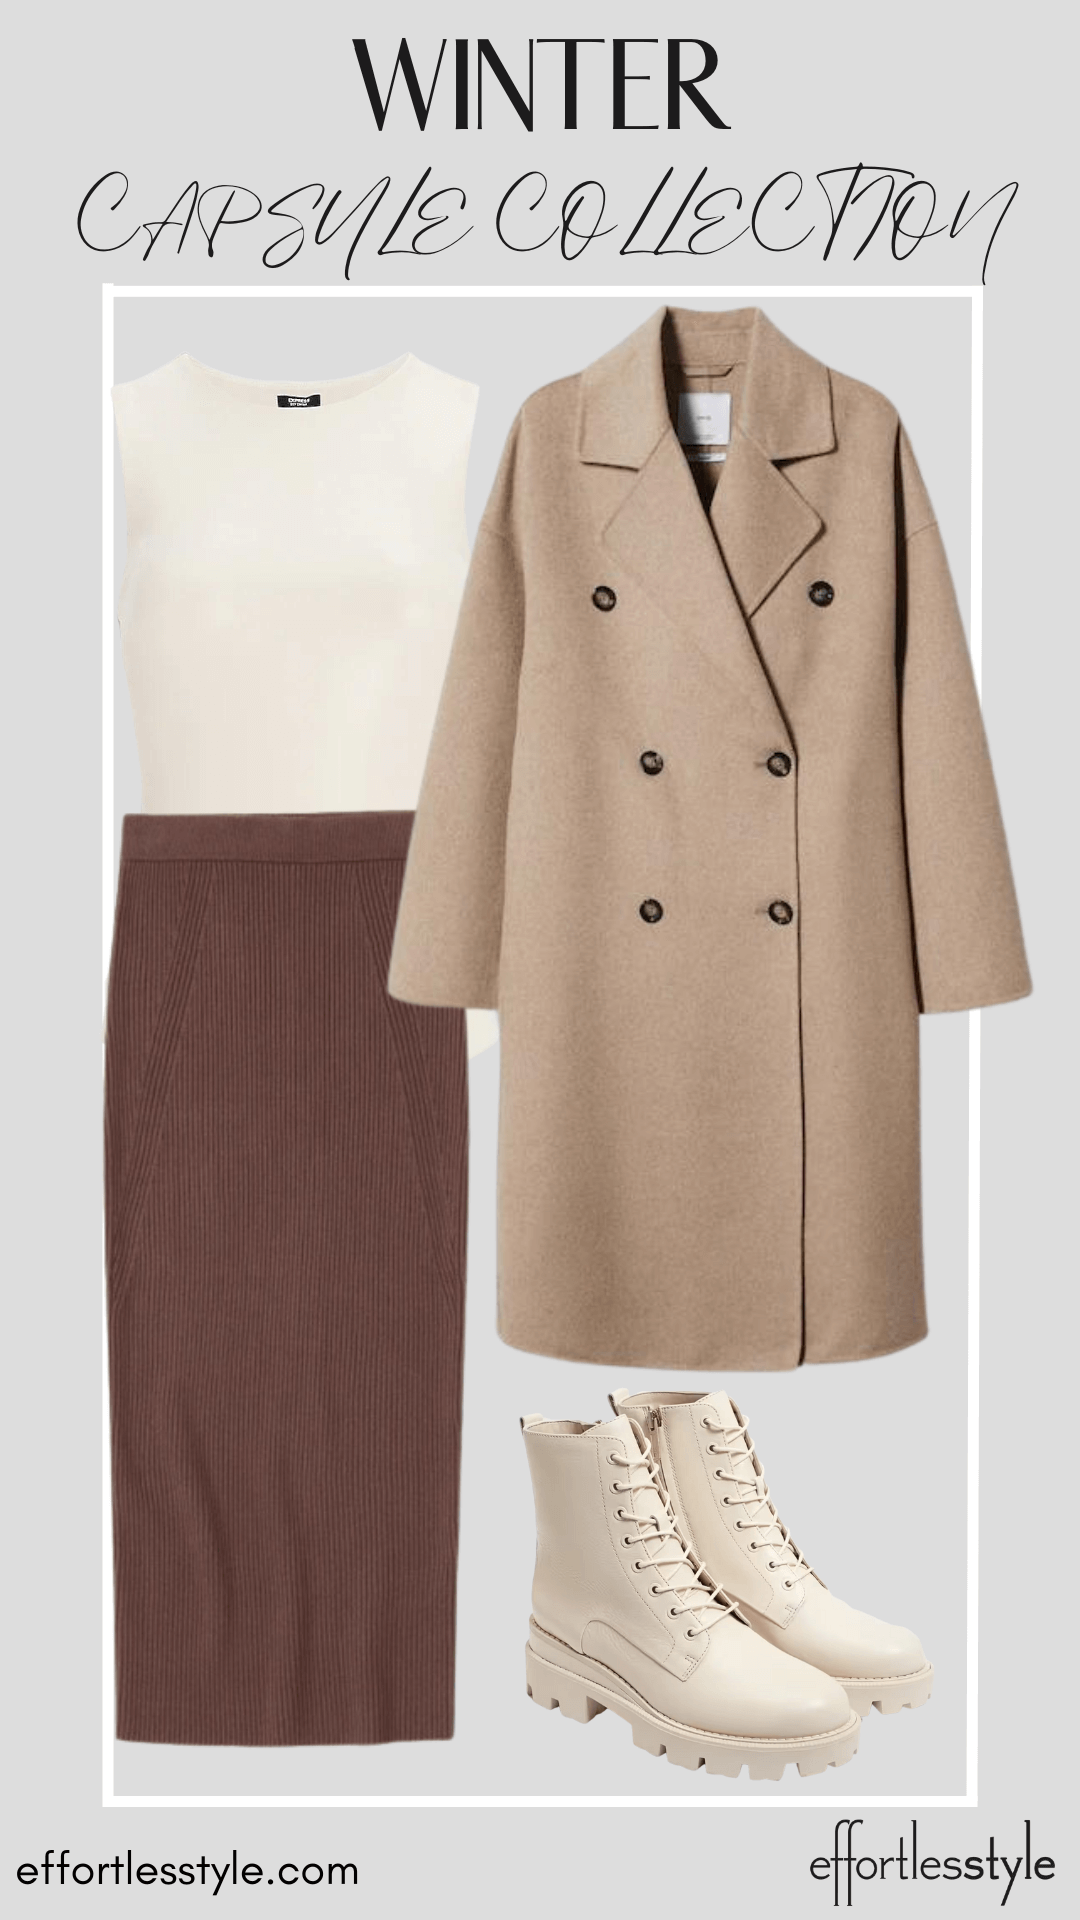 How To Wear Our Winter Capsule Wardrobe - Part 1 Wool Coat & Faux Leather Bodysuit & Midi Skirt how to wear a long coat with a midi skirt how to style a midi skirt with combat boots how to wear combat boots this winter how to style a leather bodysuit